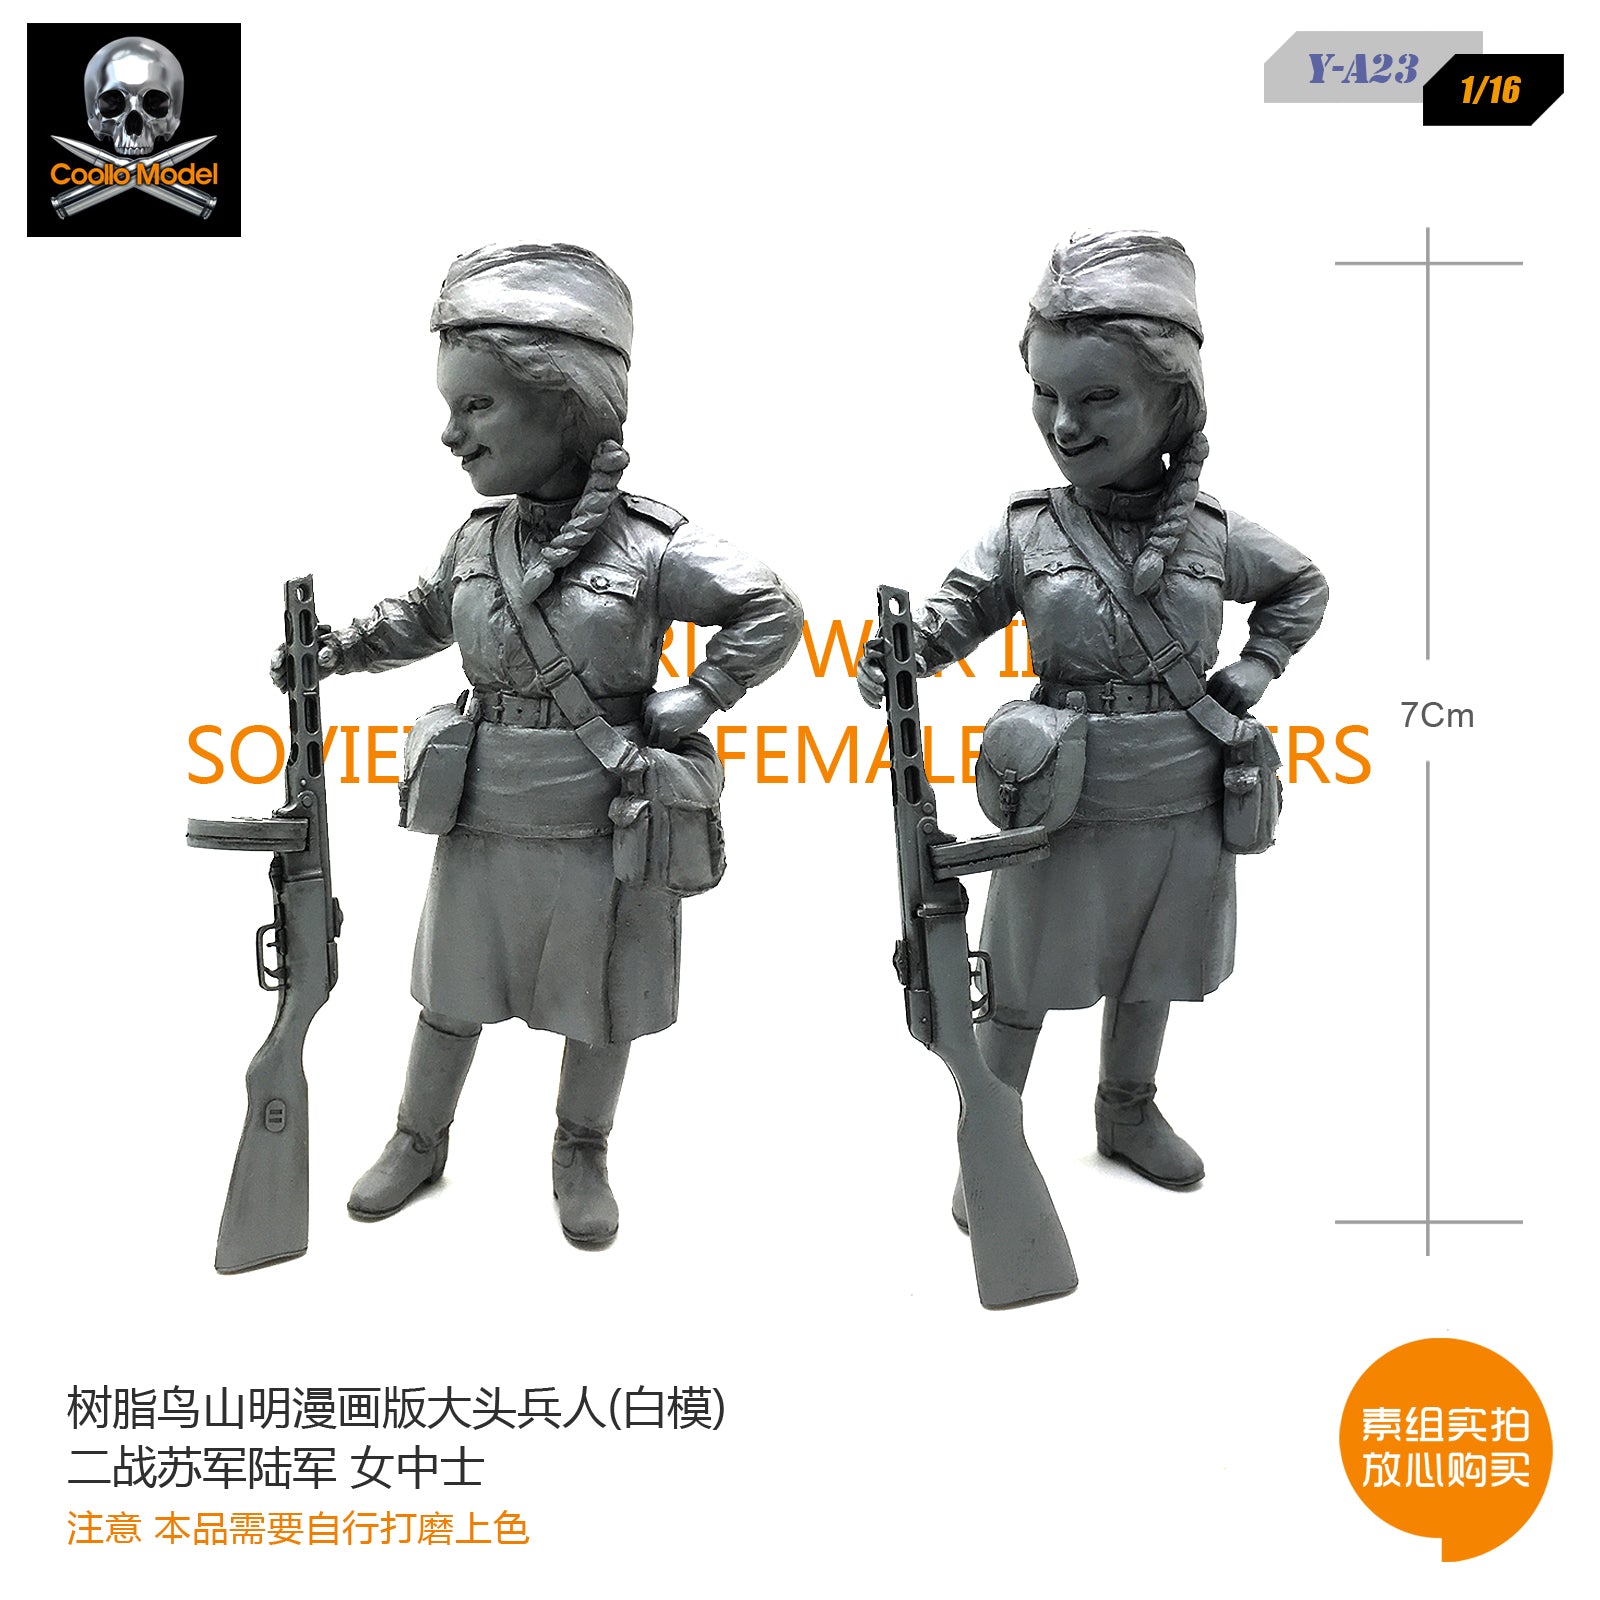 1/16 resin soldiers birds mountain Ming cartoon version of World War II Soviet soldiers in the soldiers element model Y-A23